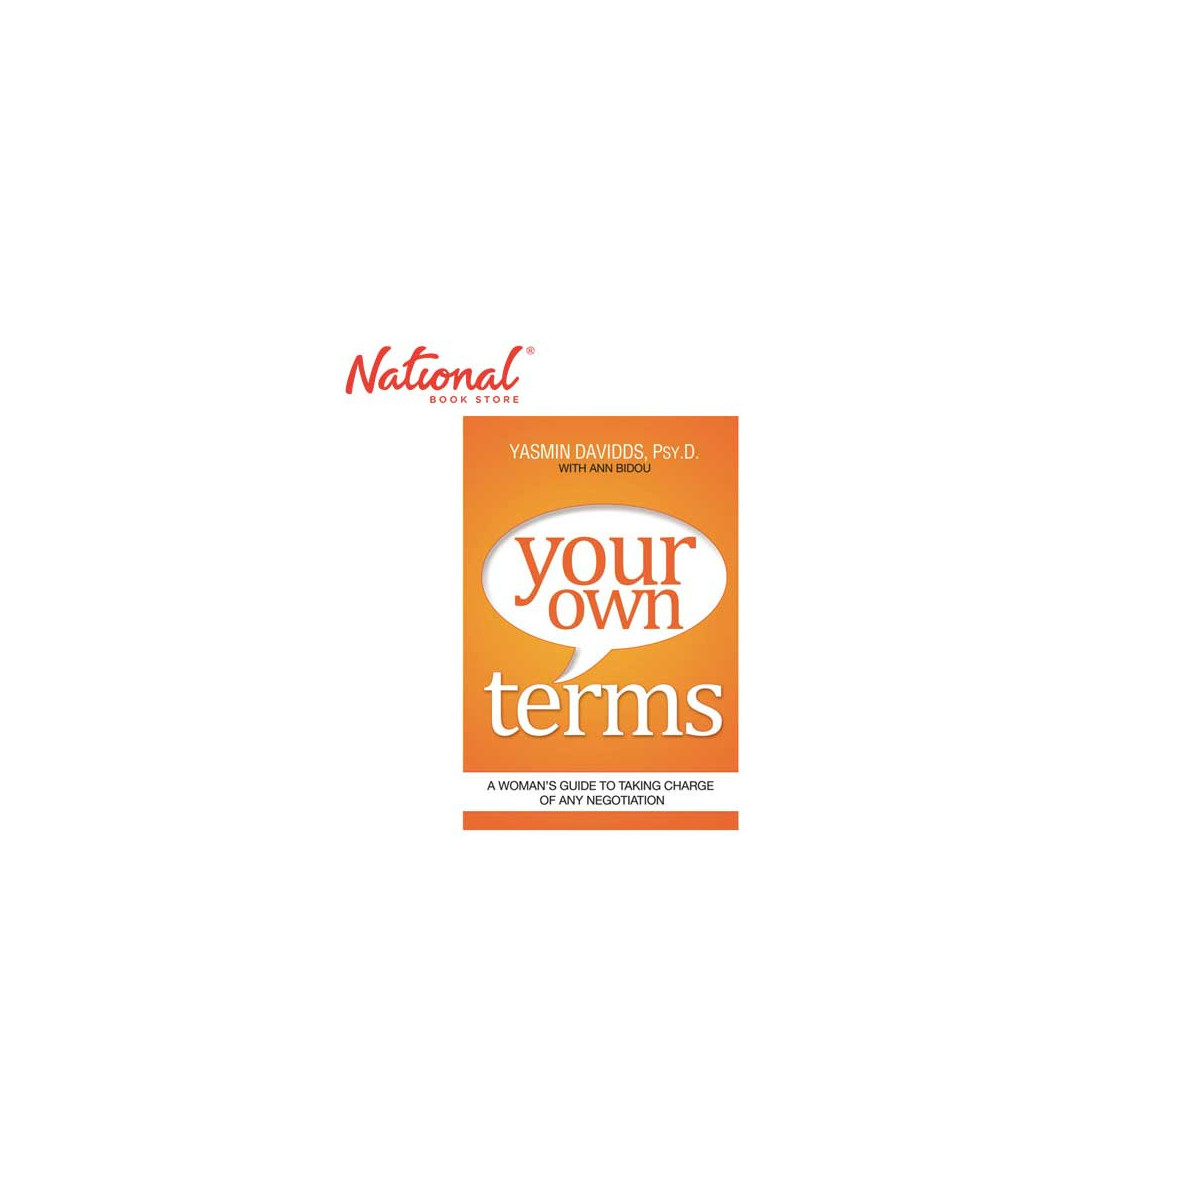 Your Own Terms by Yasmin Davidds - Trade Paperback - Marketing - Sales Books